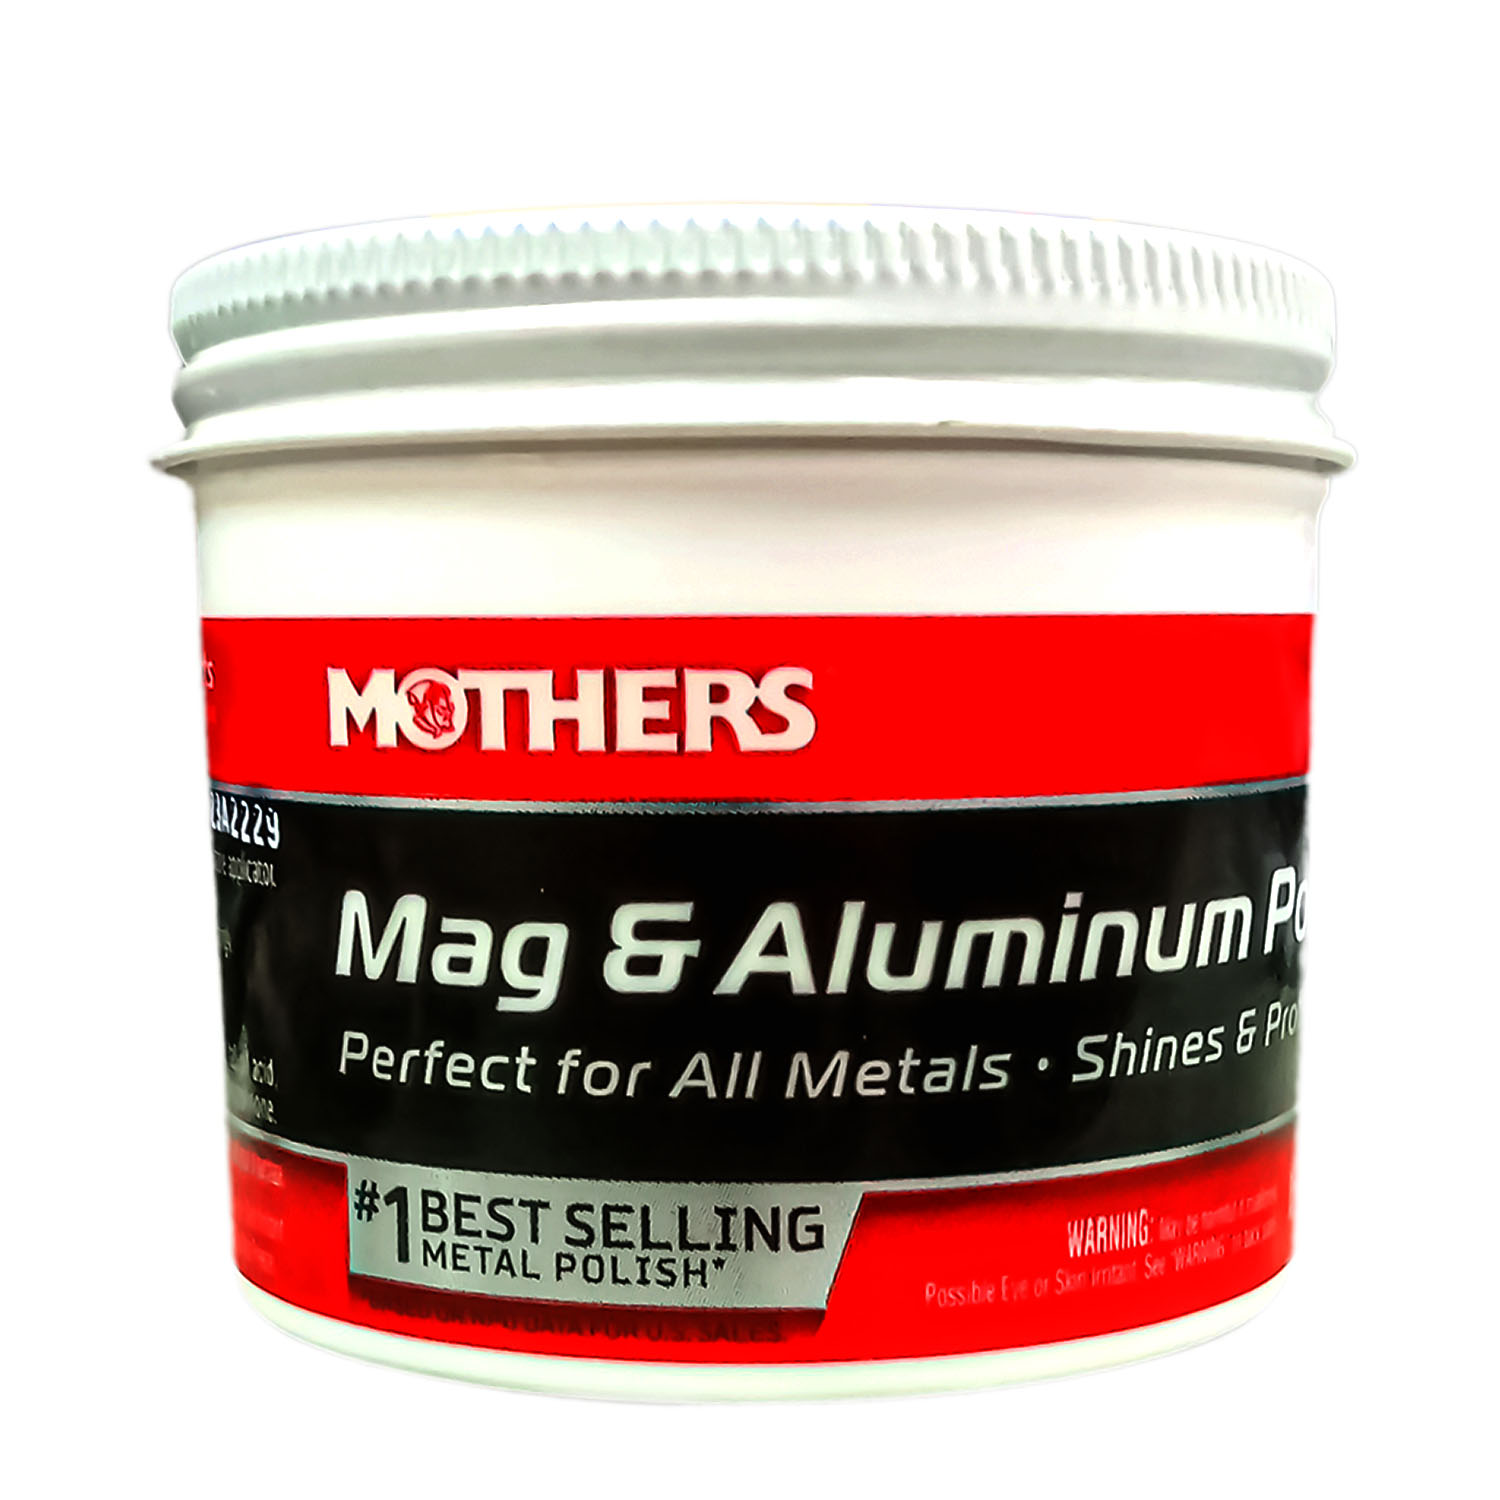 Mothers Mag and Aluminum Polish 141g Perfect for All Metals, Shine